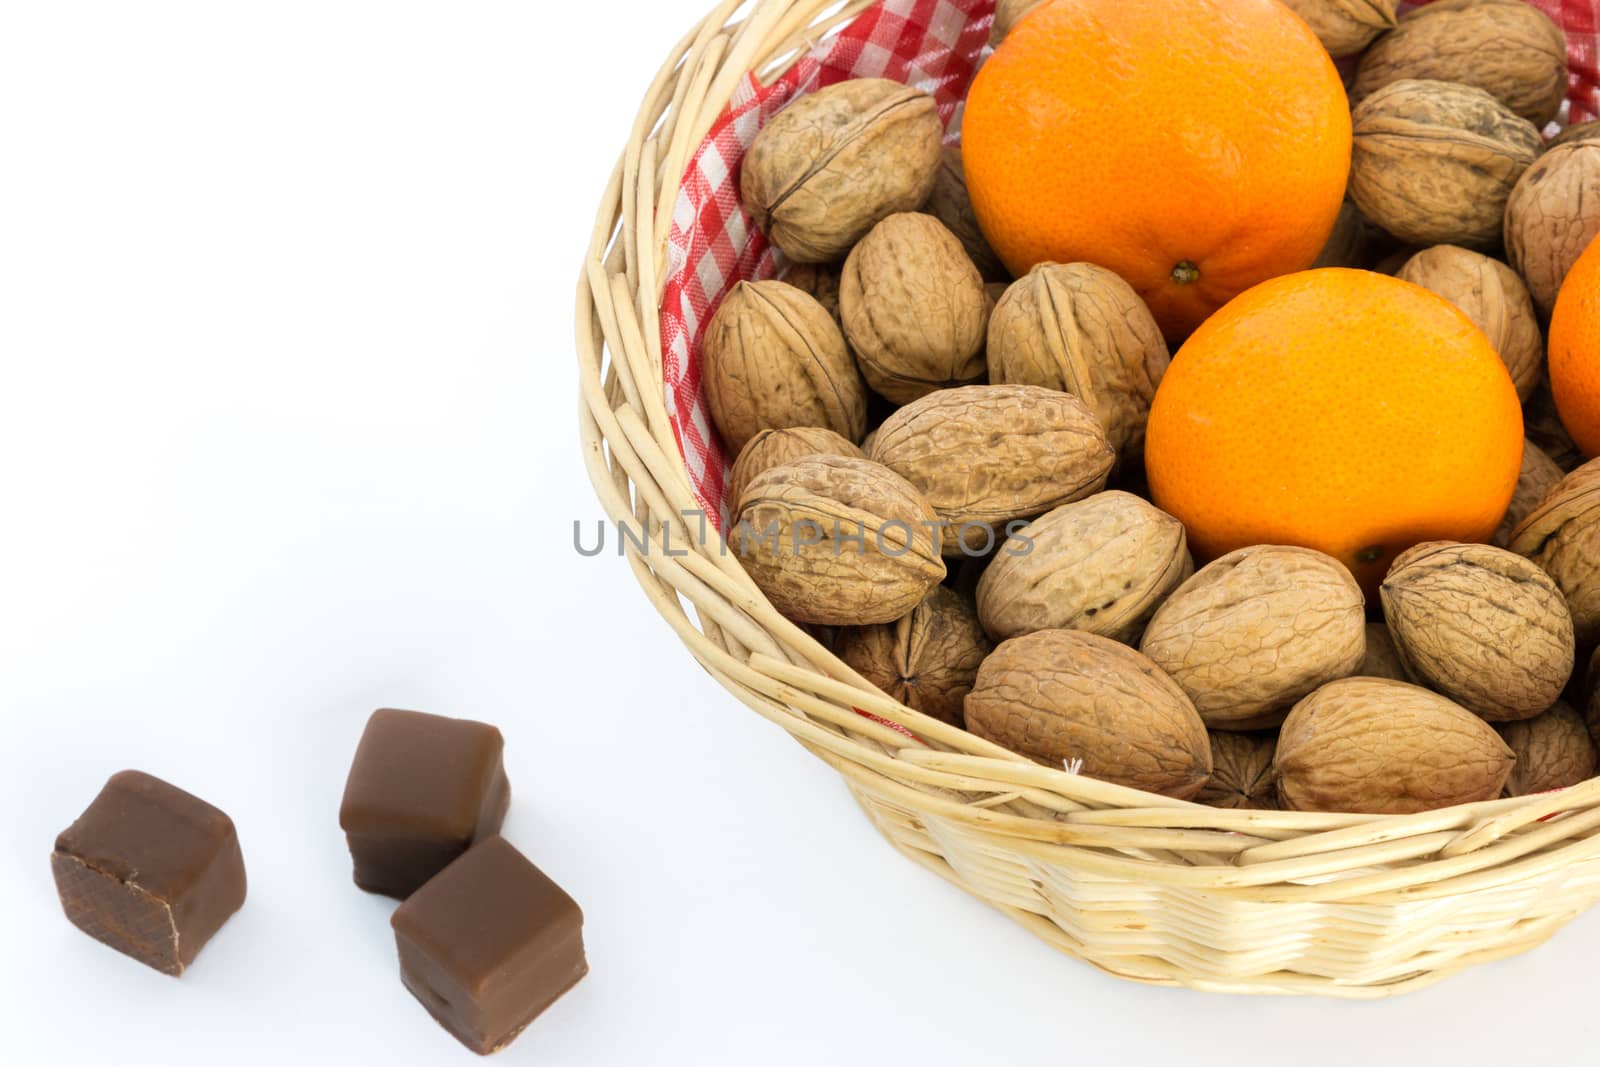 Small Basket with Walnuts and Tangerines by MarkDw